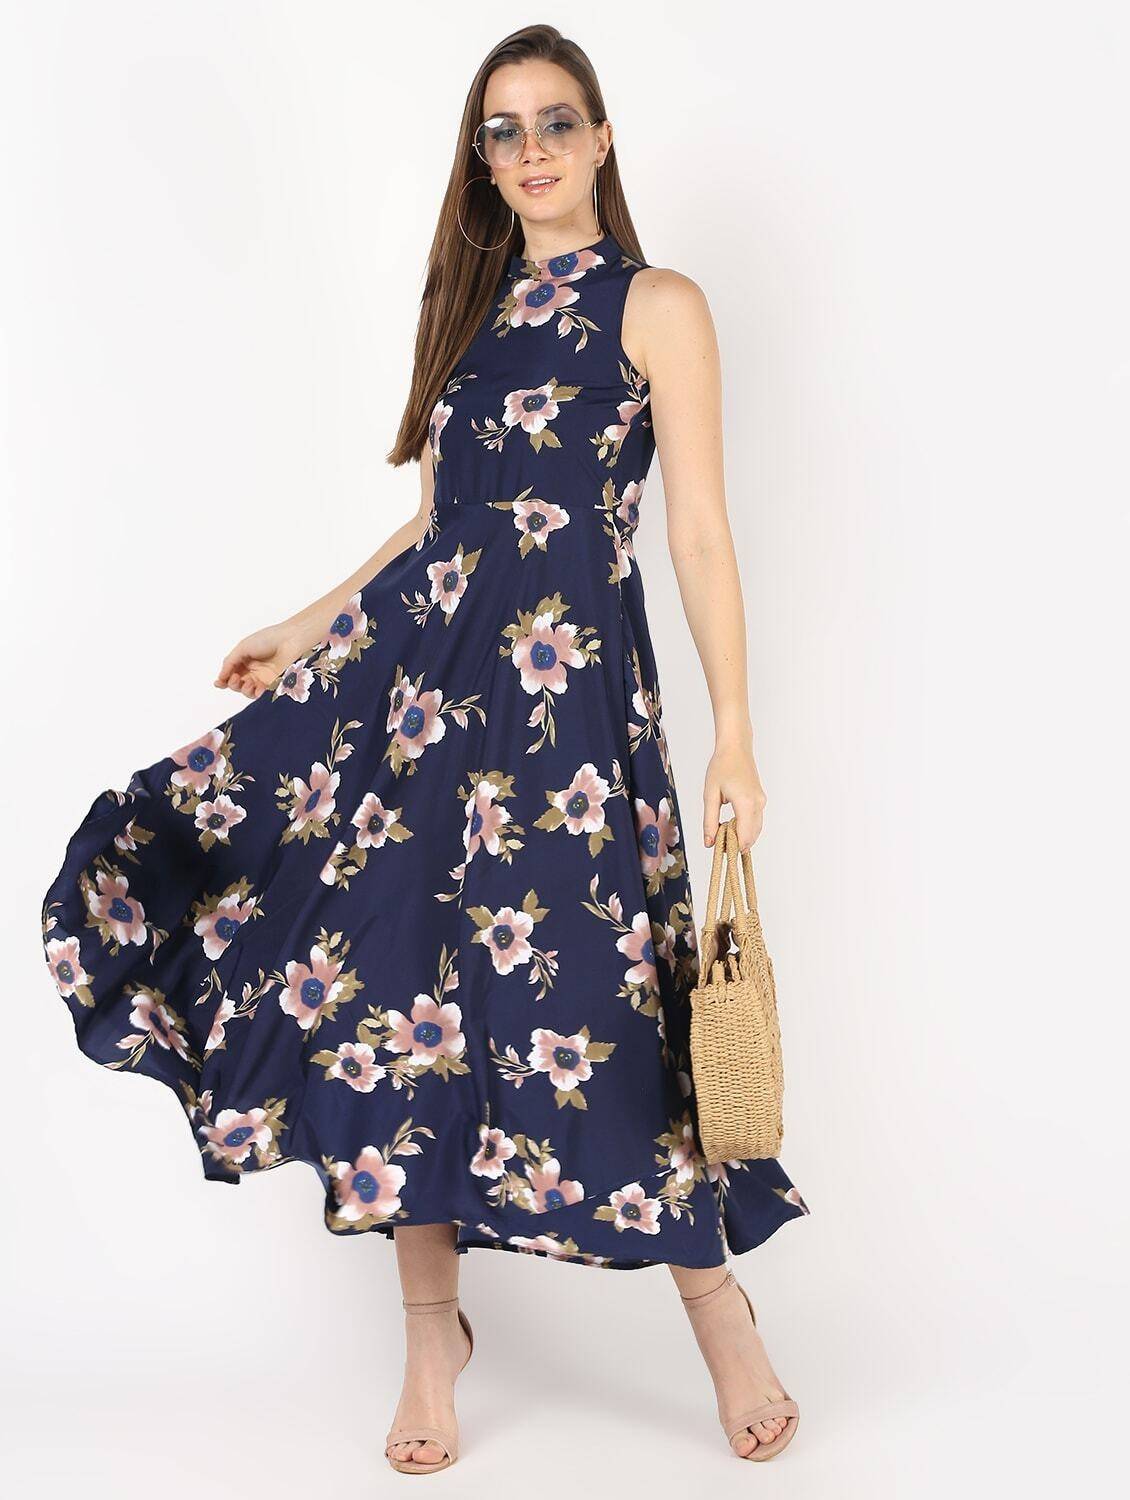 Women's Navy Blue Floral Printed Flair With Drawstring Party Dress - Cheera